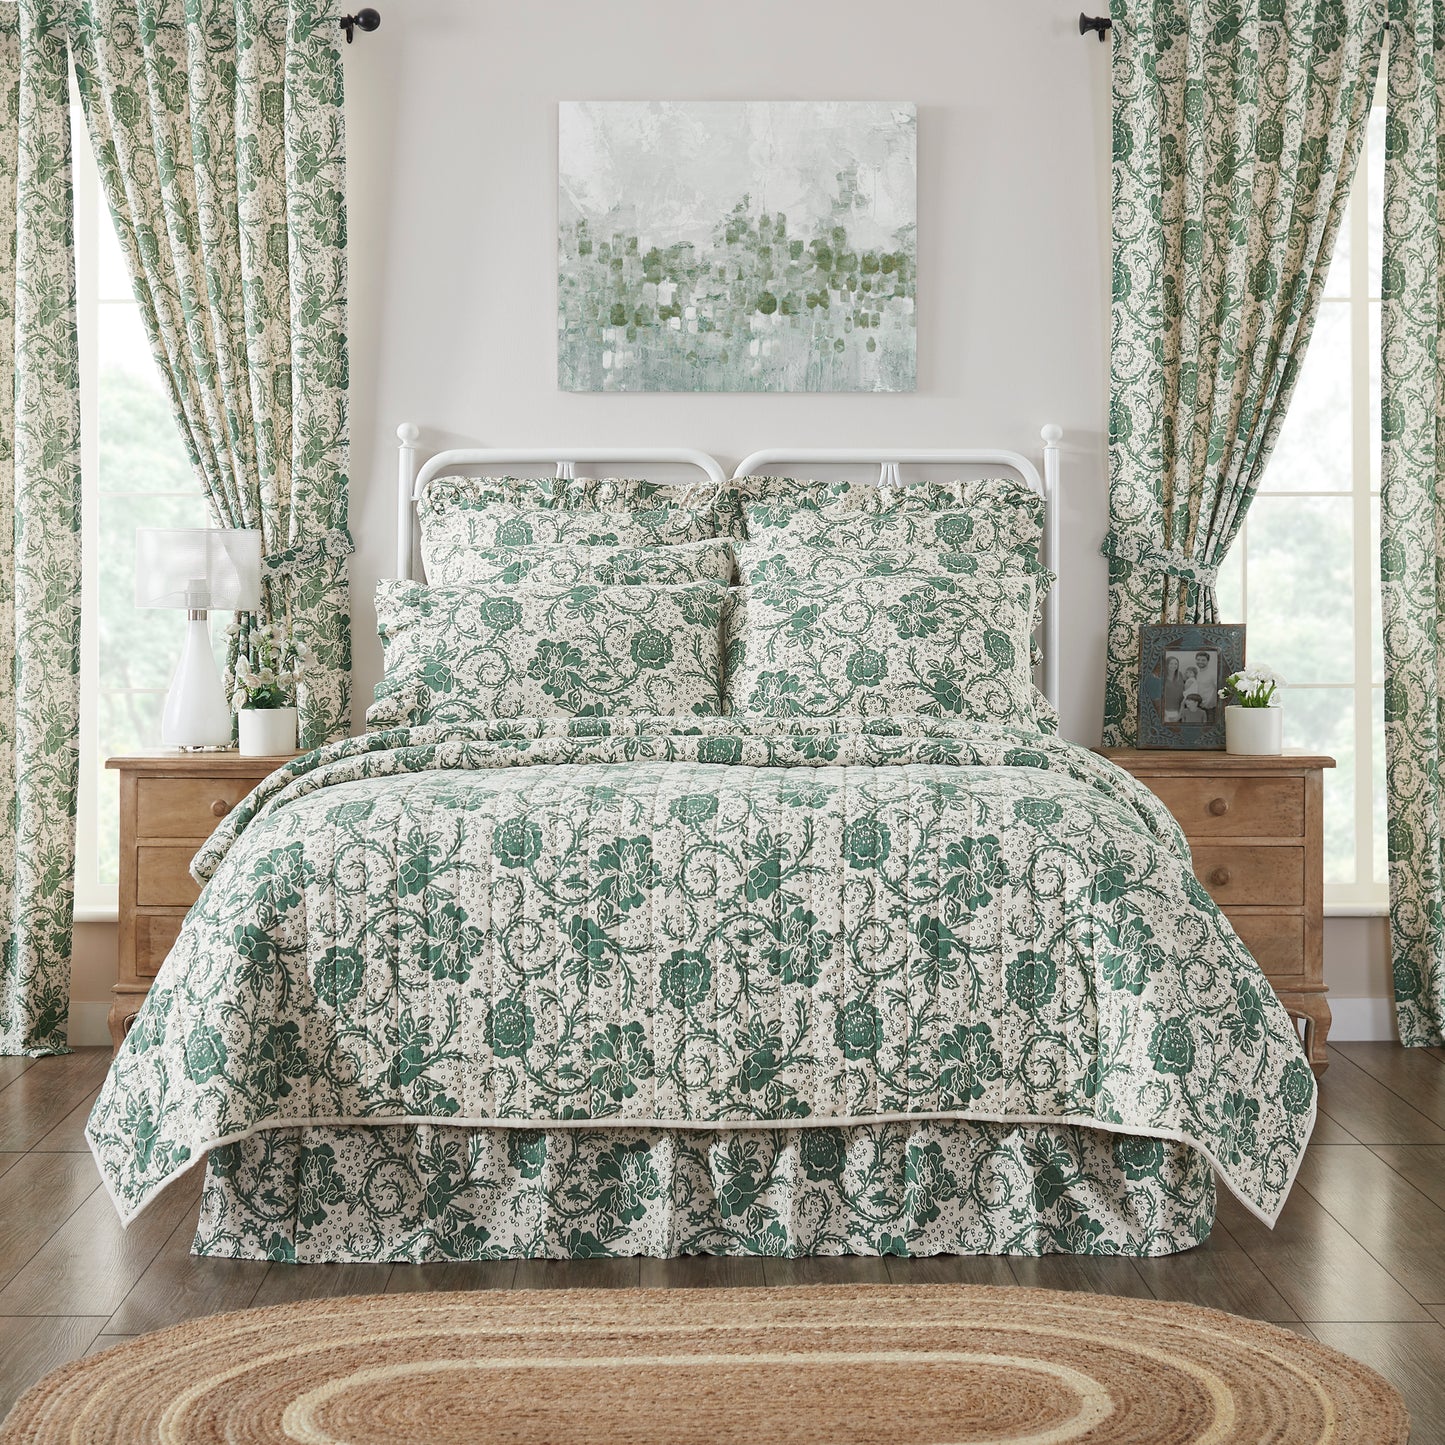 81210-Dorset-Green-Floral-Luxury-King-Quilt-120WX105L-image-3